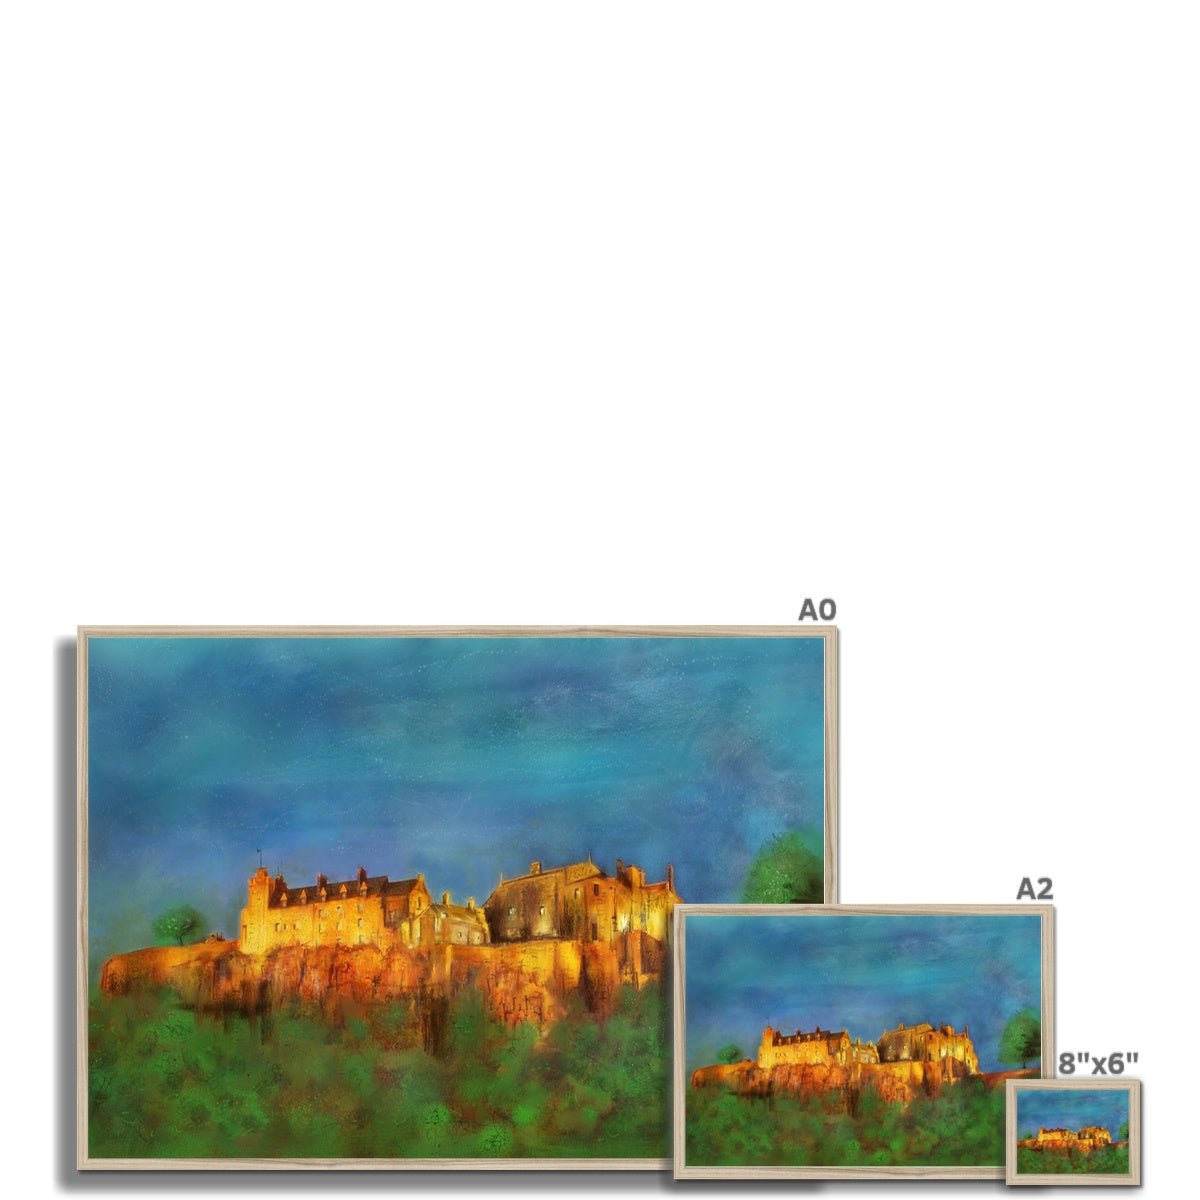 Stirling Castle Painting | Framed Prints From Scotland-Framed Prints-Historic & Iconic Scotland Art Gallery-Paintings, Prints, Homeware, Art Gifts From Scotland By Scottish Artist Kevin Hunter